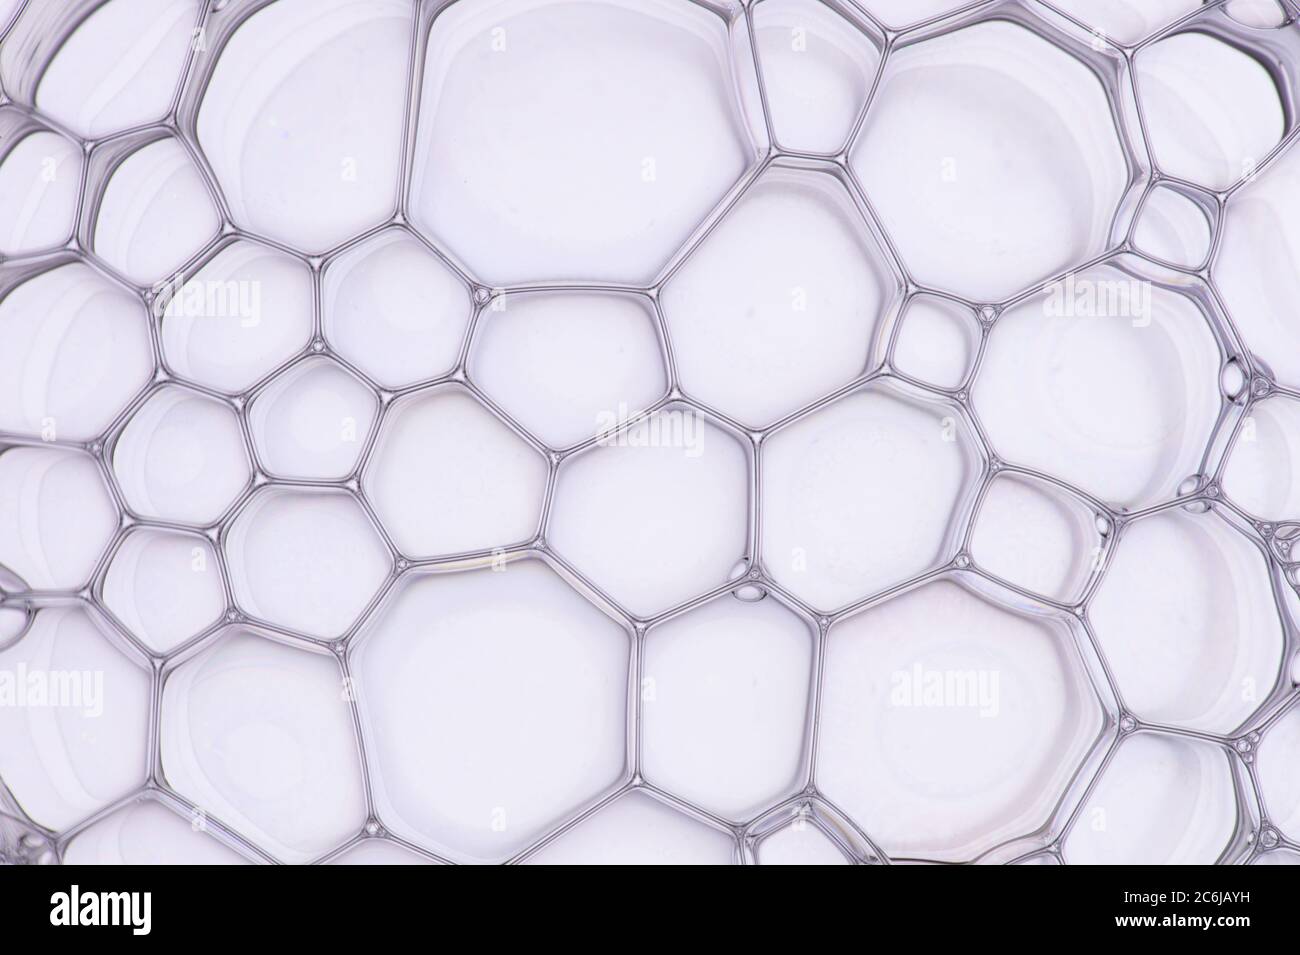 Macro close up of soap bubbles look like scienctific image of cell and cell membrane Stock Photo